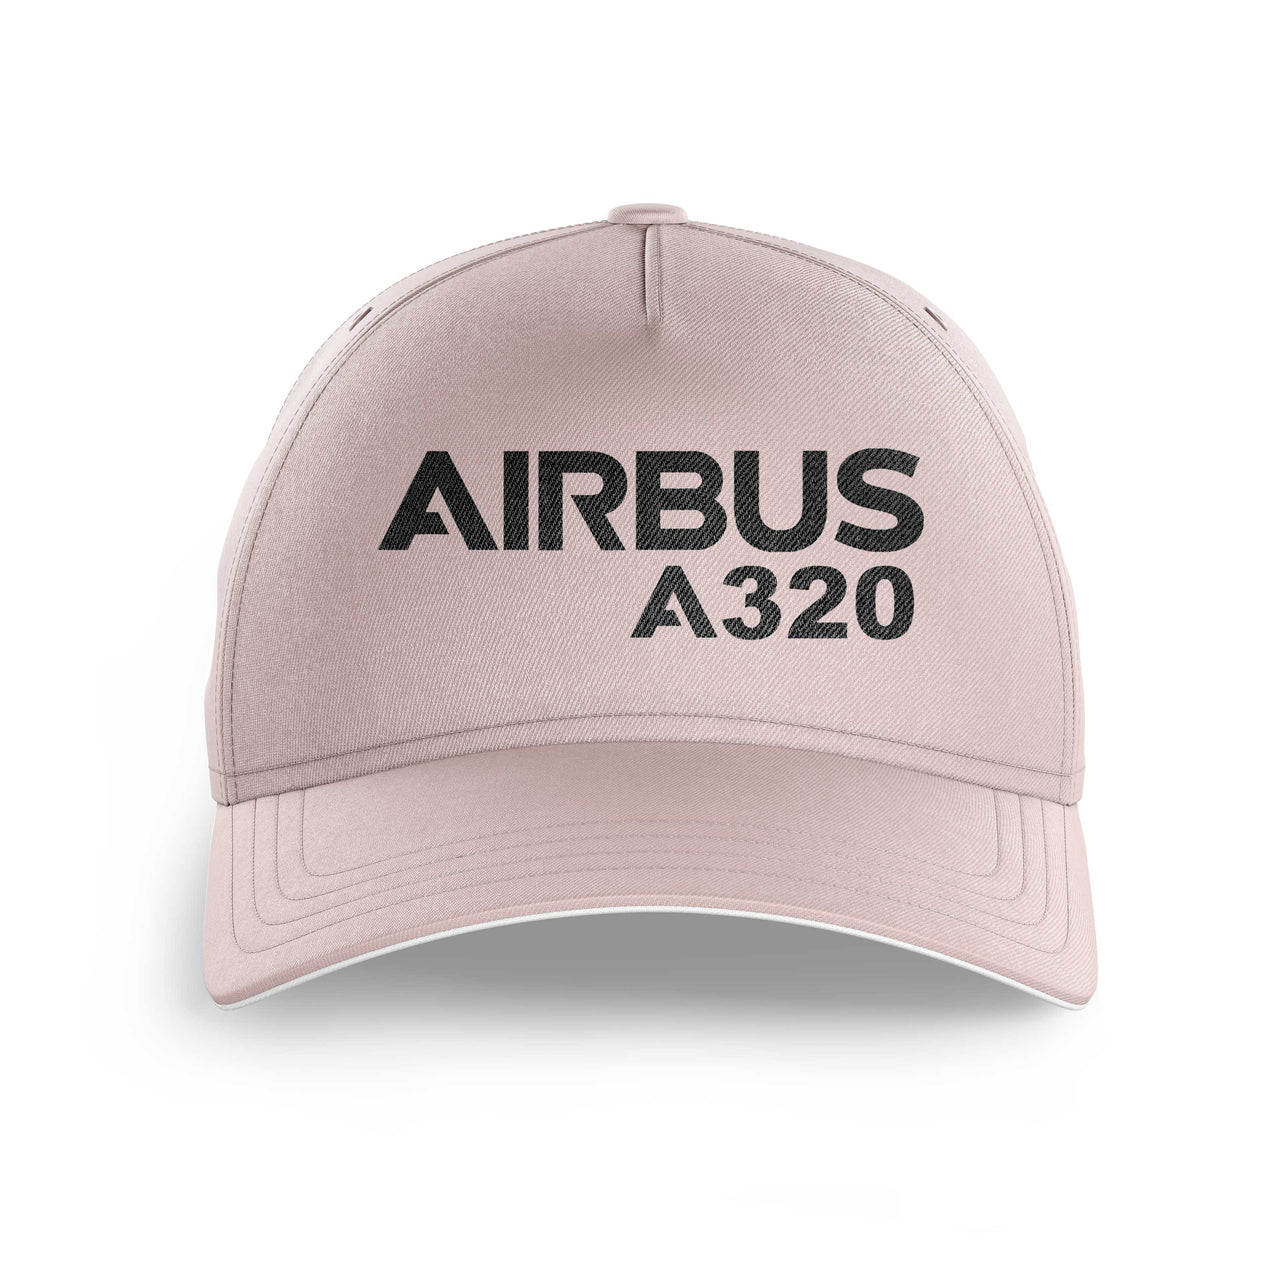 Airbus A320 & Text Printed Hats